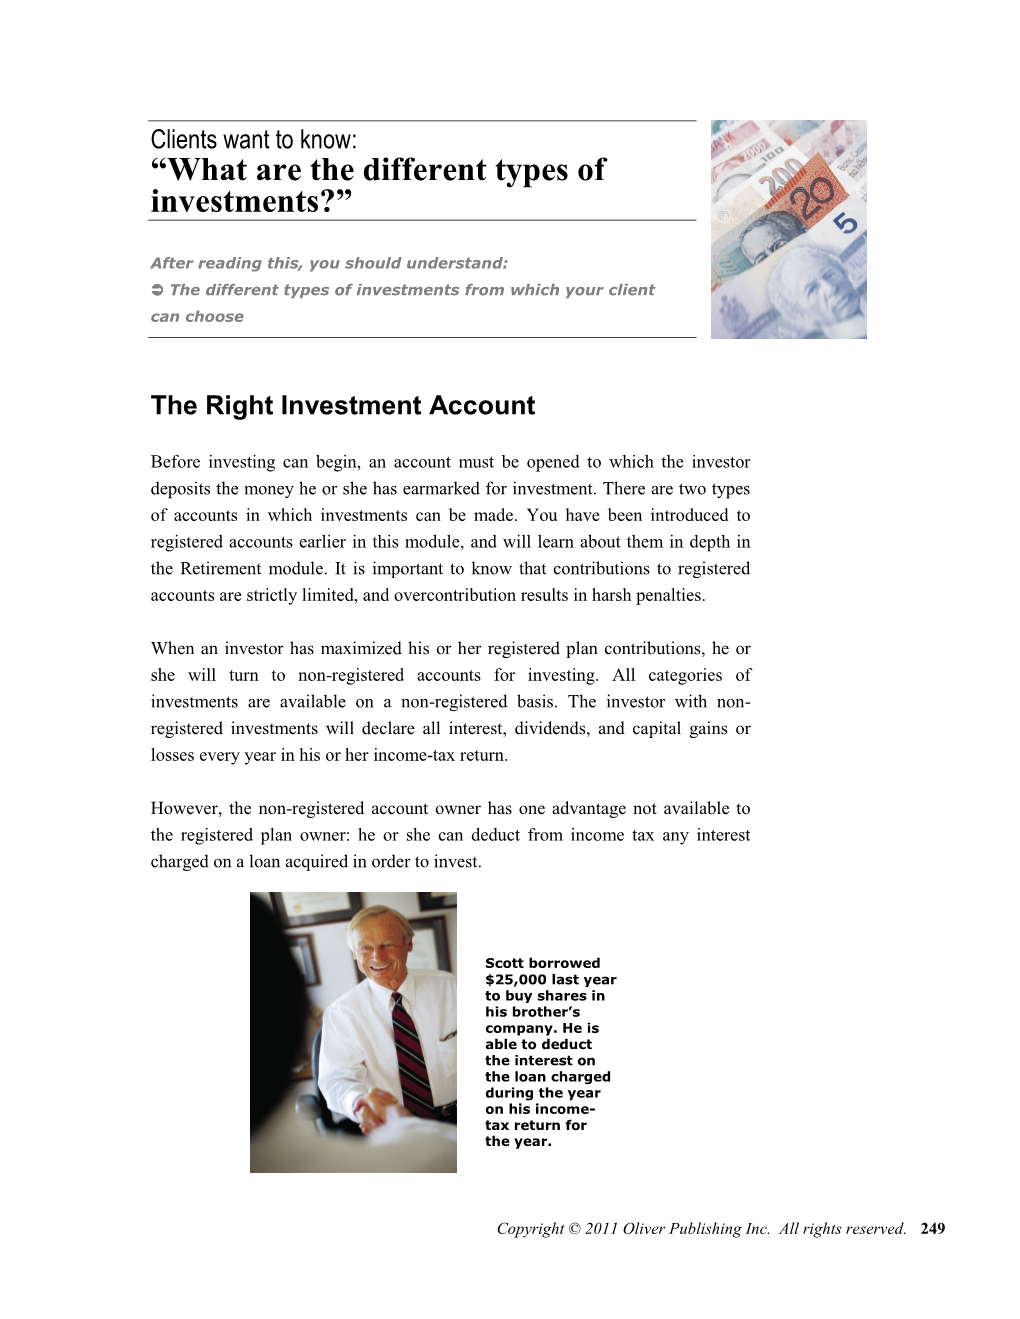 Clients Want to Know: “What Are the Different Types of Investments?”